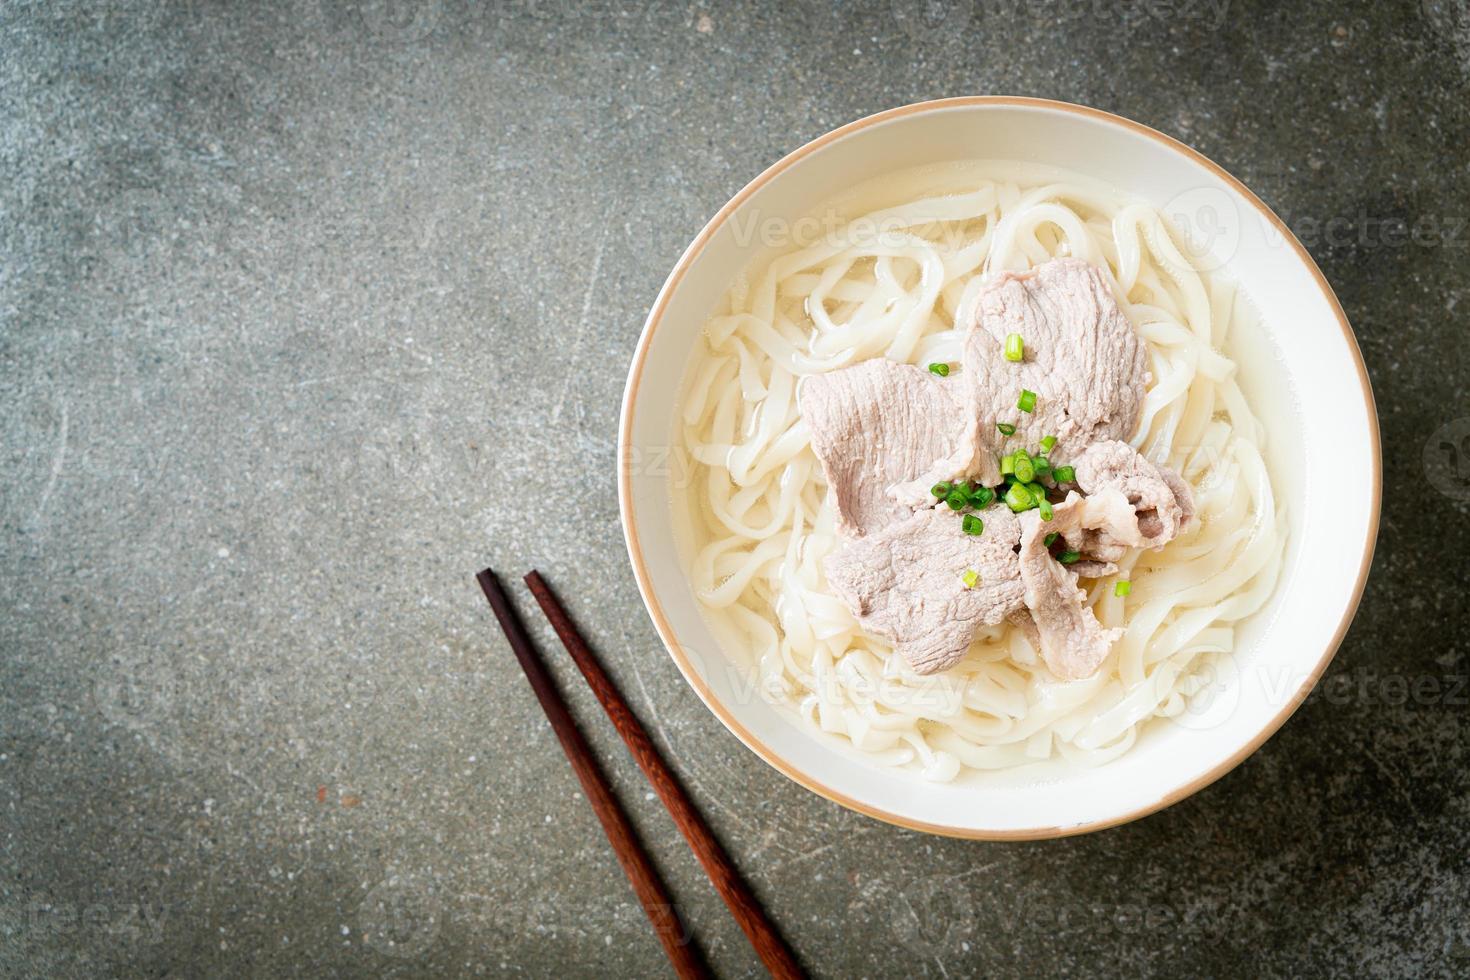 Homemade udon ramen noodles with pork in clear soup photo